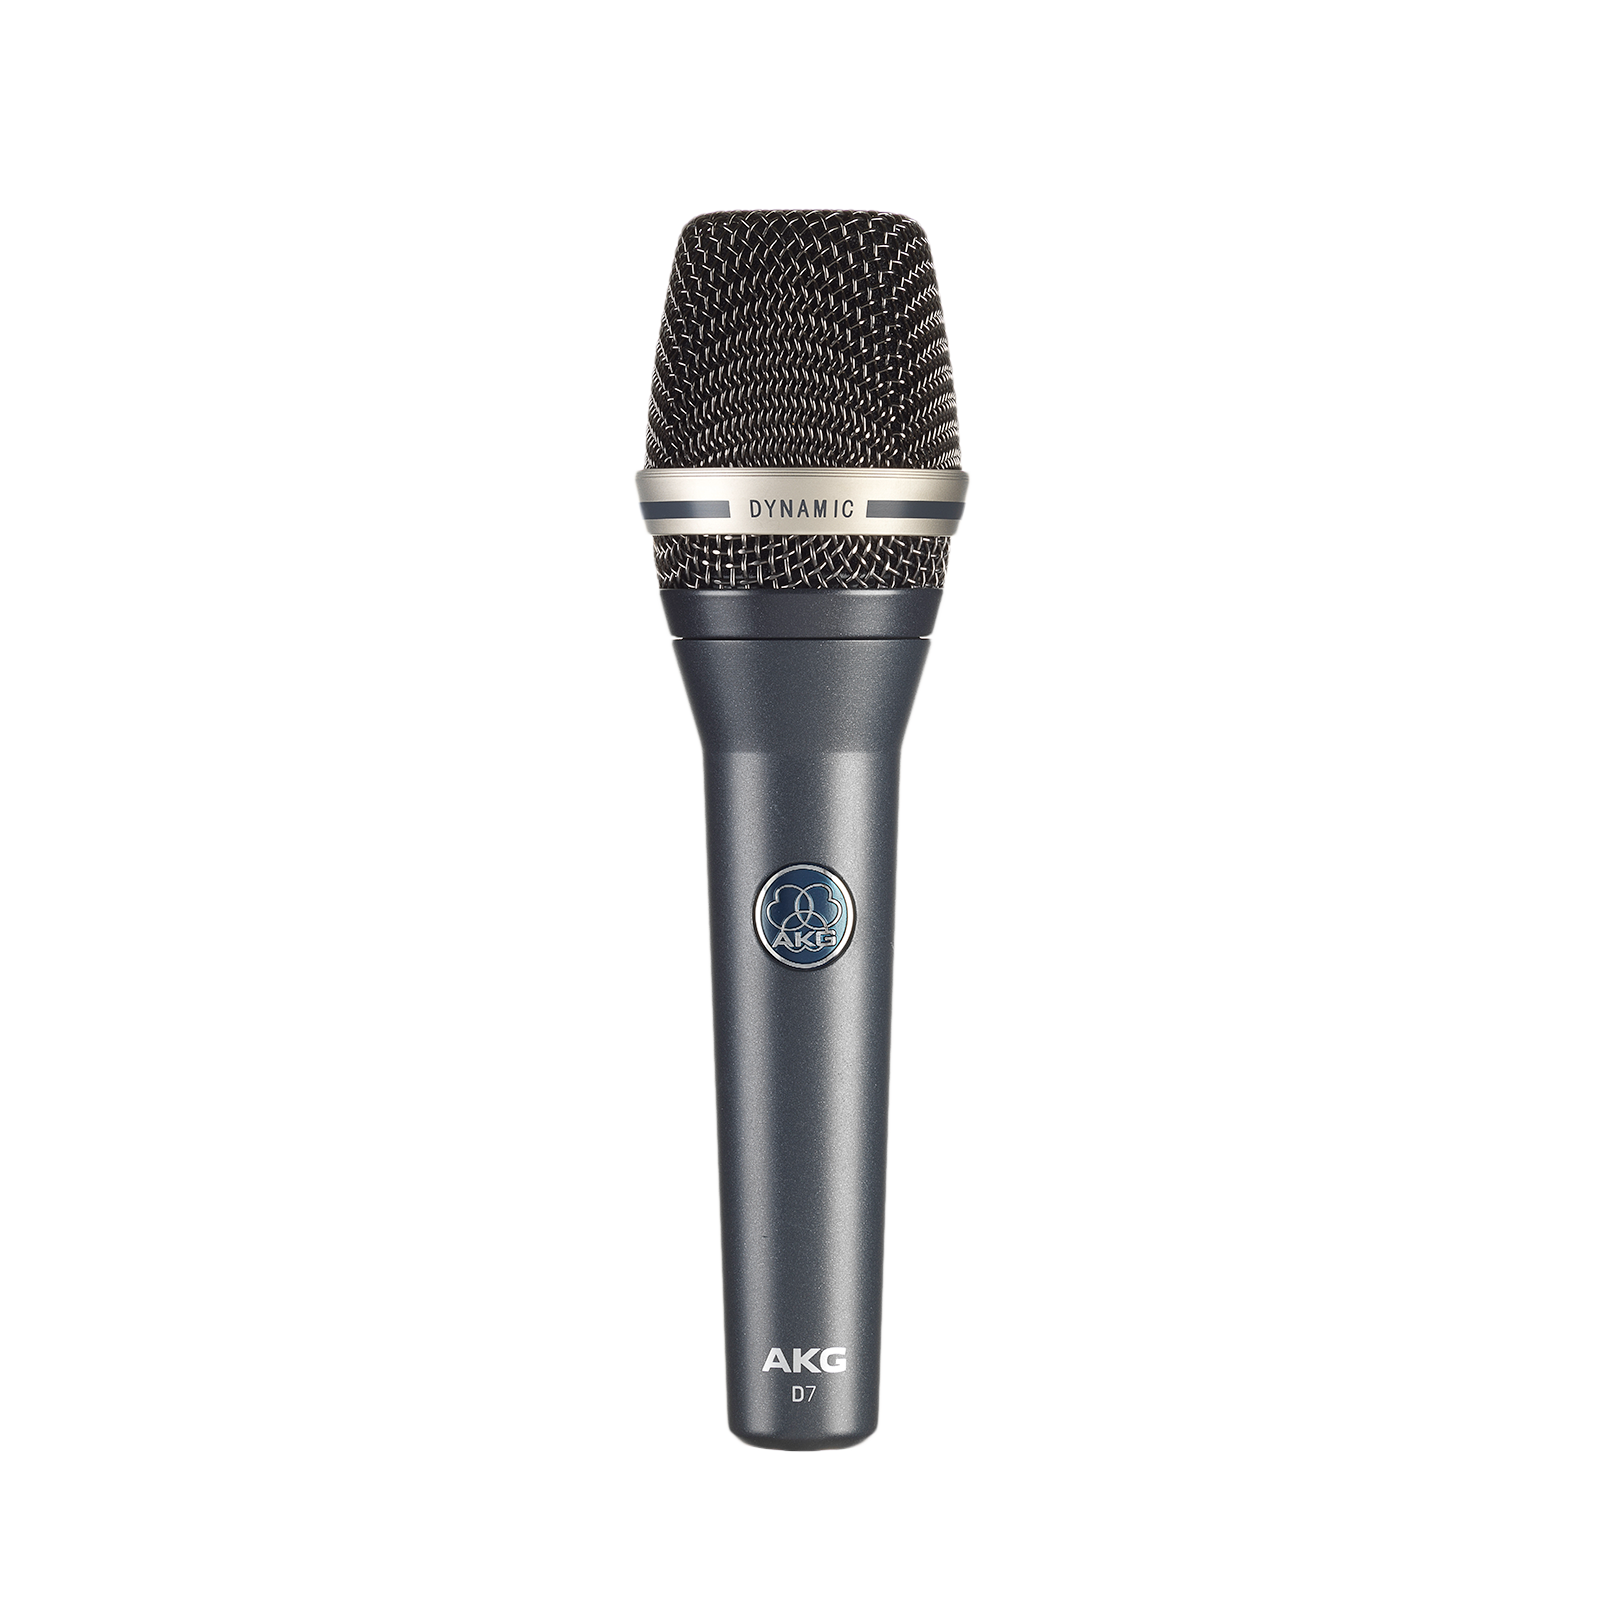 AKG Pro Audio D7 Reference Dynamic Vocal Microphone with Varimotion Diagphragm for Clean and Crisp Sound with Outstanding High Gain before Feedback - 305broadcast